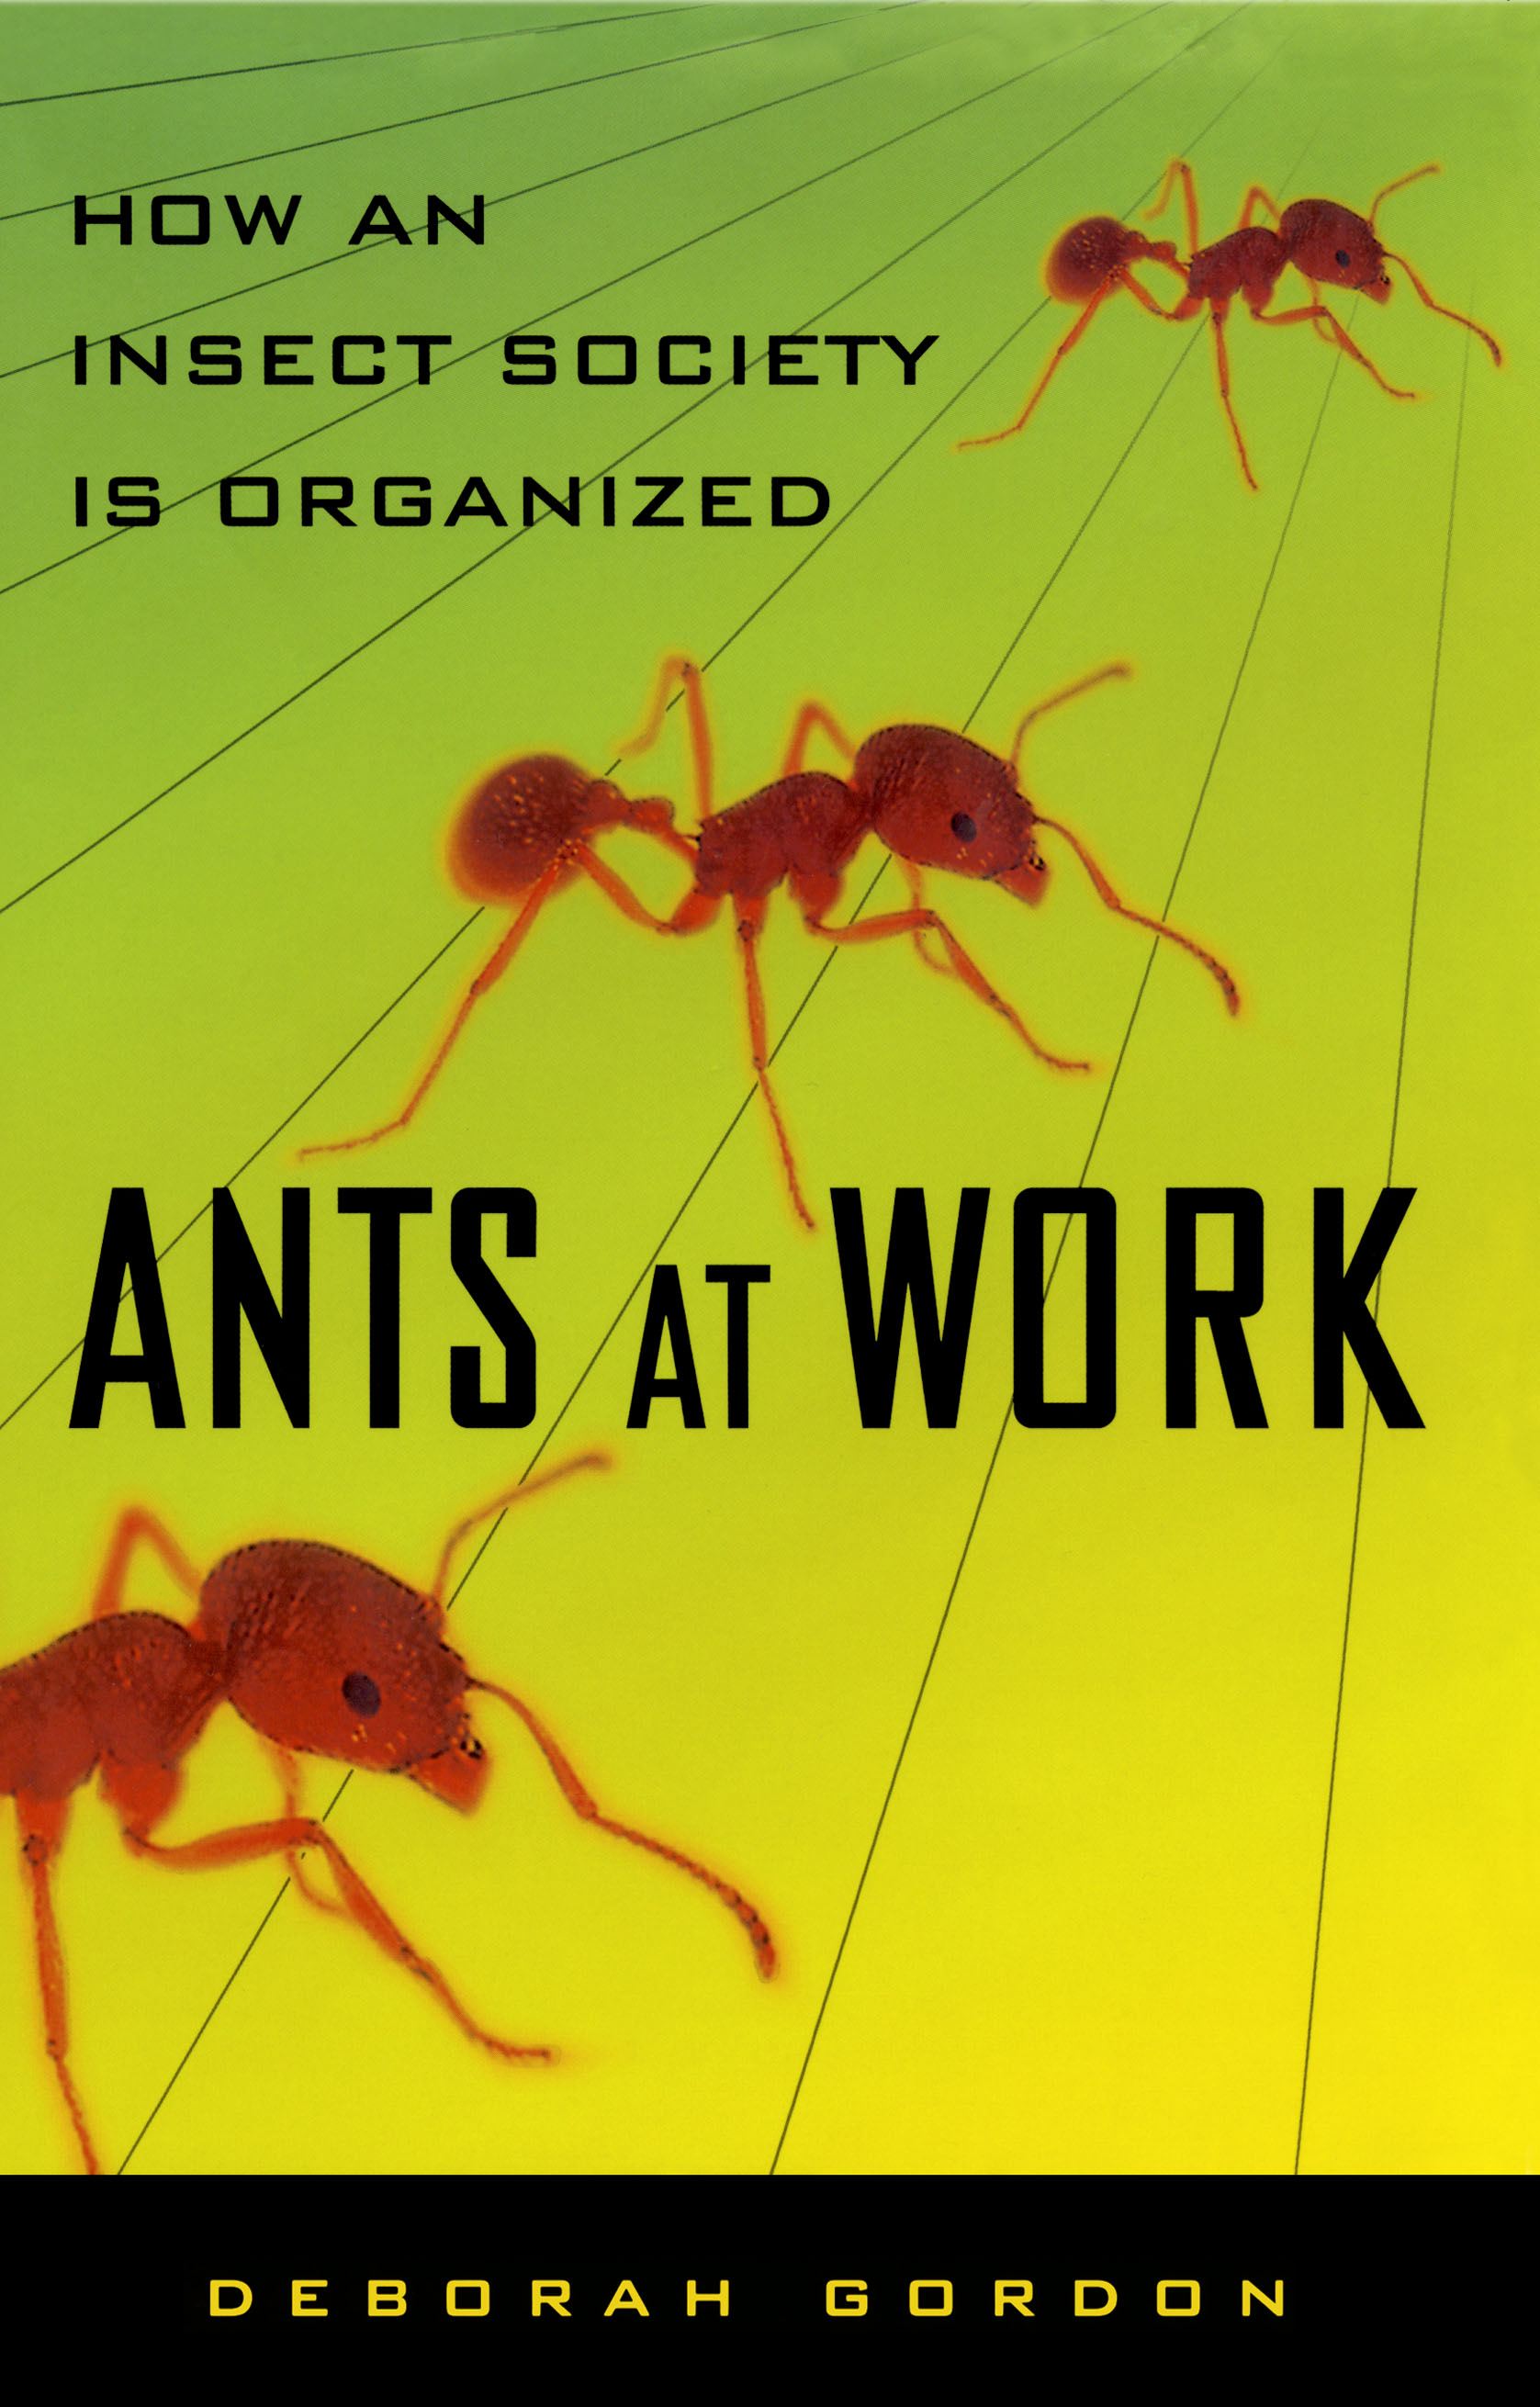 Ants At Work : How An Insect Society Is Organized (Paperback) - image 1 of 1